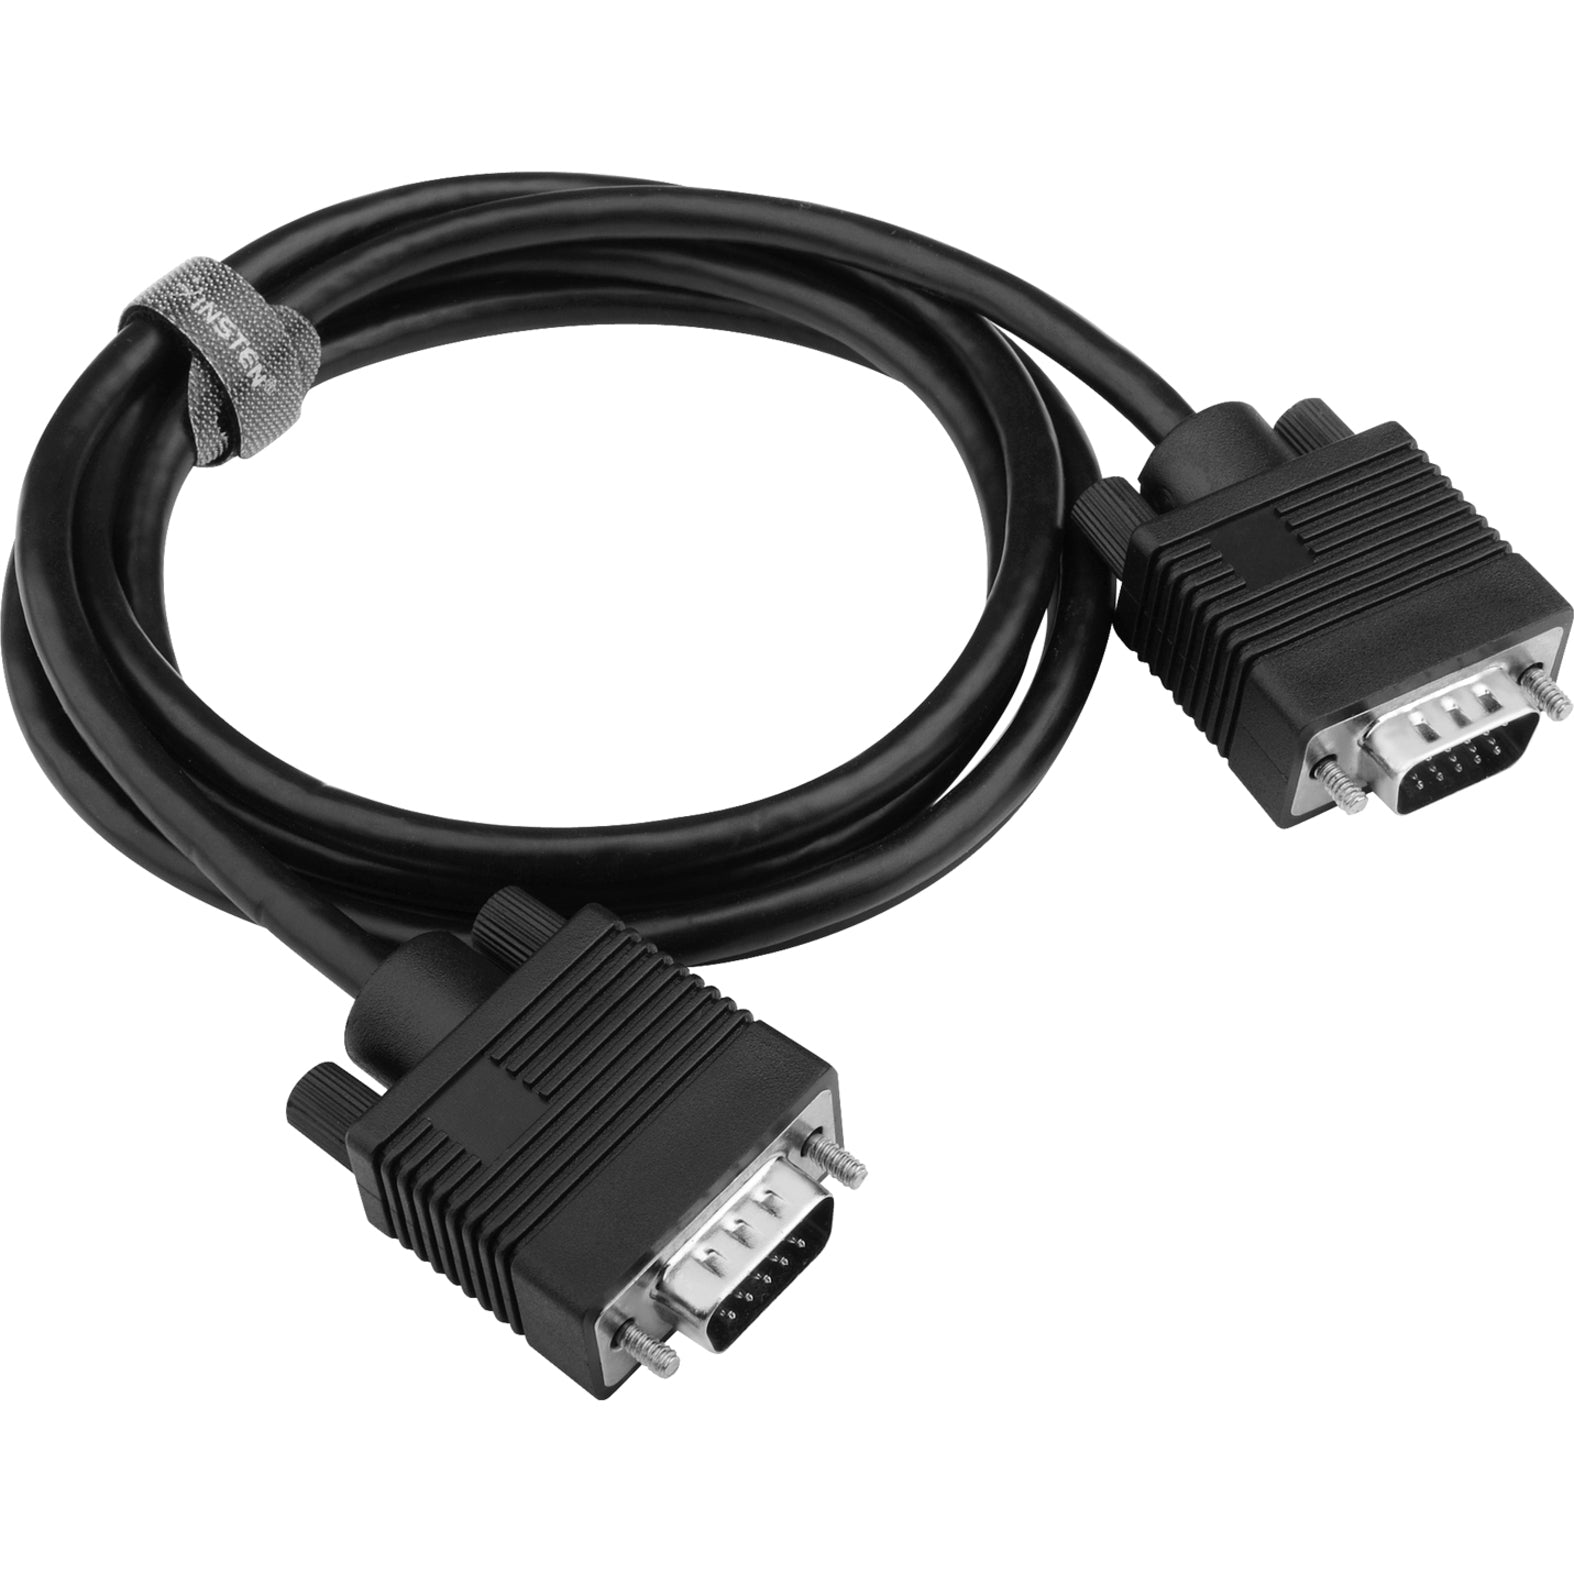 4XEM 4XVGAMM10FT VGA Cable, 10FT High Resolution Coax M/M, Molded, Flexible, EMI/RF Protection